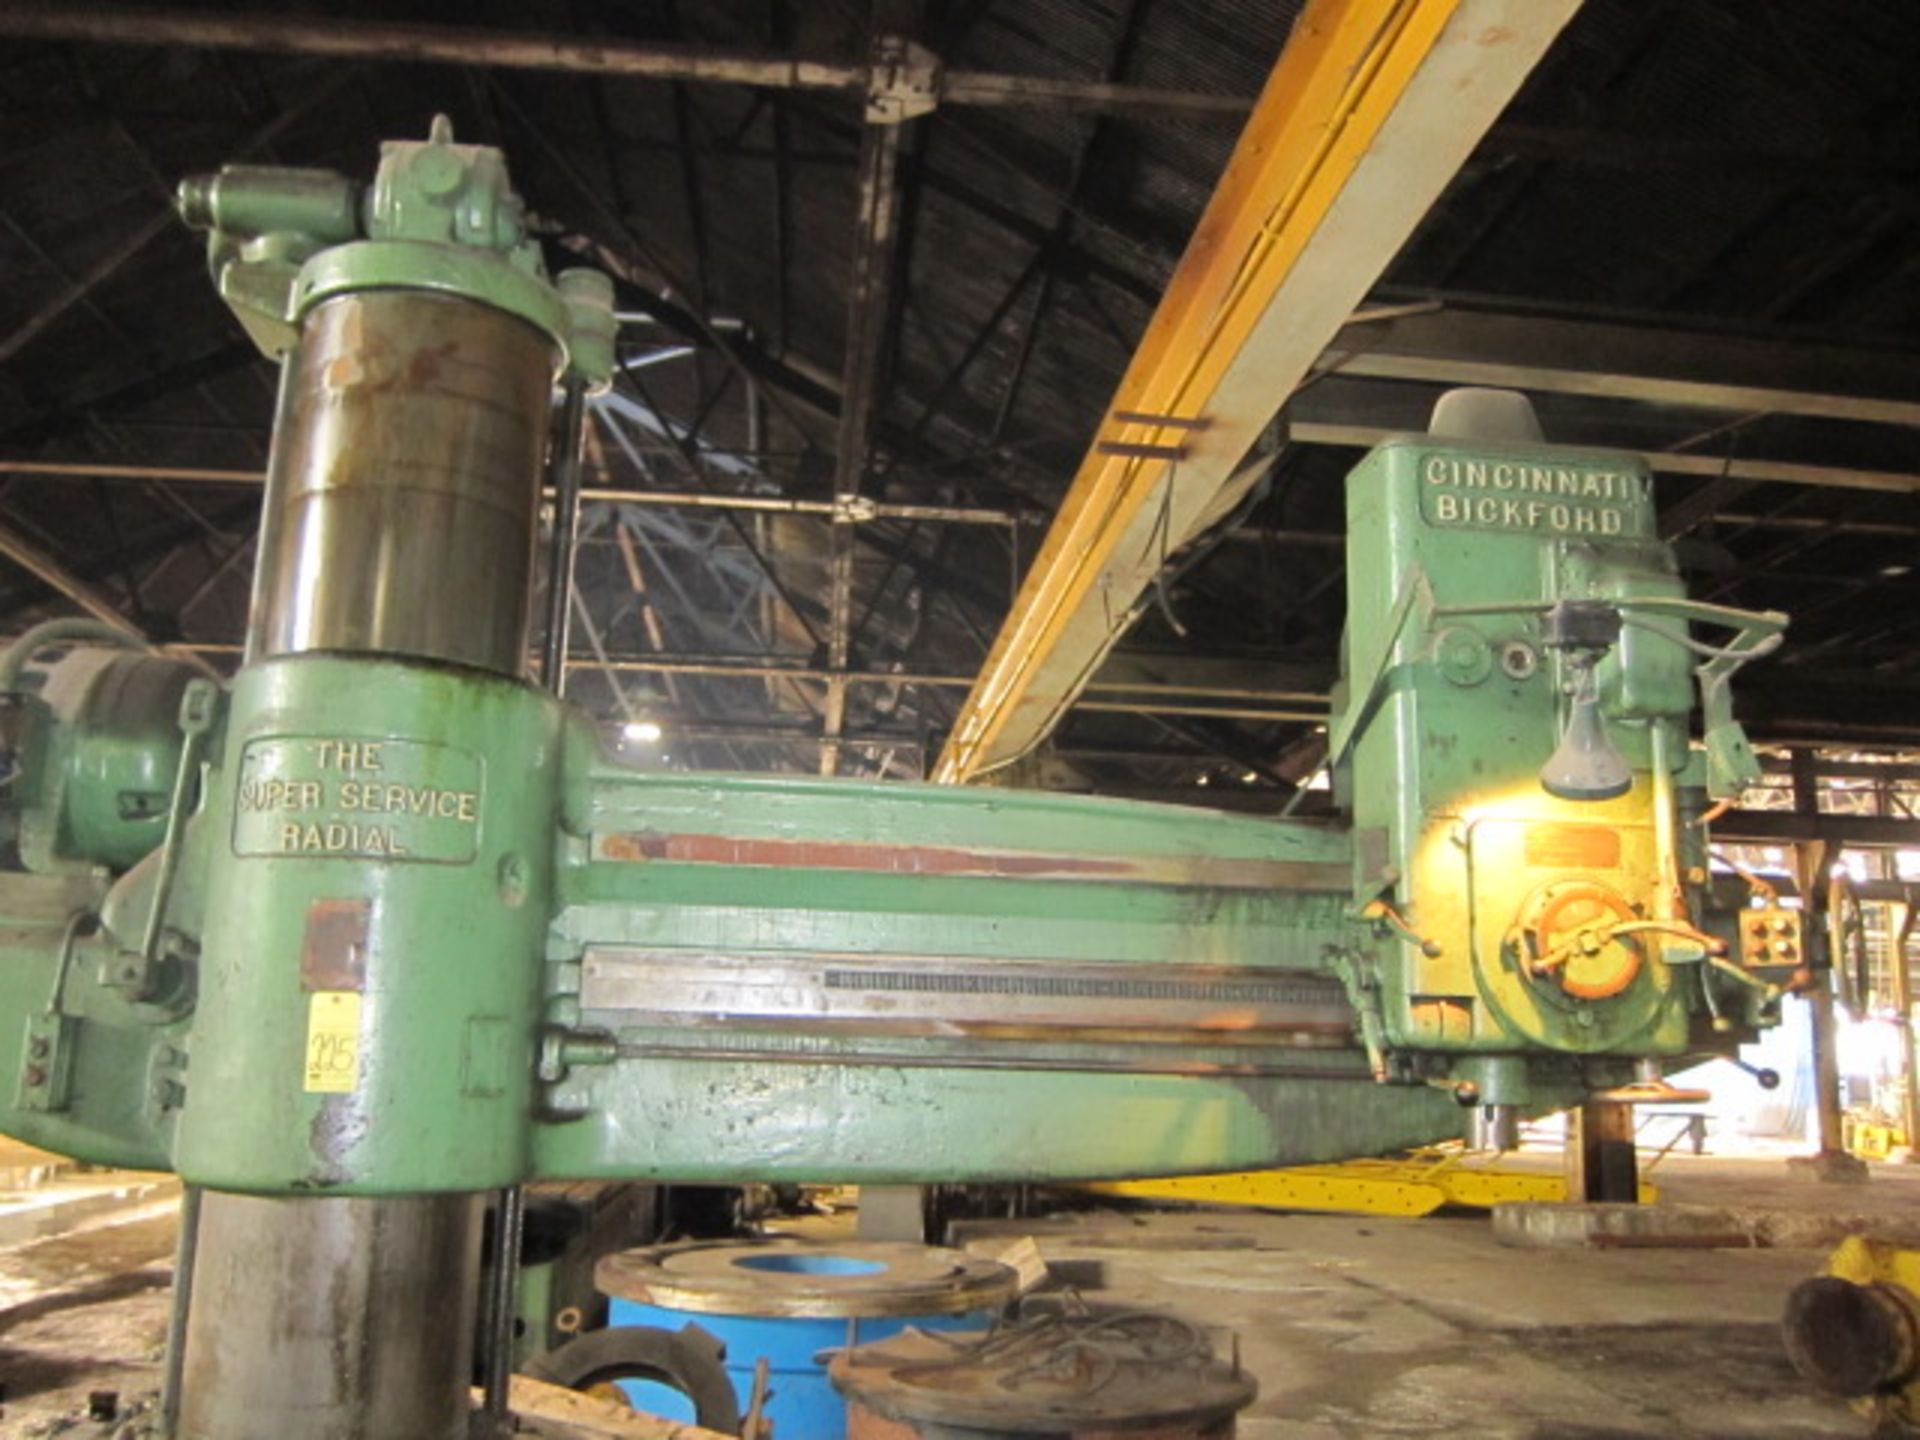 RADIAL ARM DRILL, CINCINNATI BICKFORD 7' X 19" SUPER SERVICE, S/N 6E-325 (Sold by photo. Located - Image 2 of 3